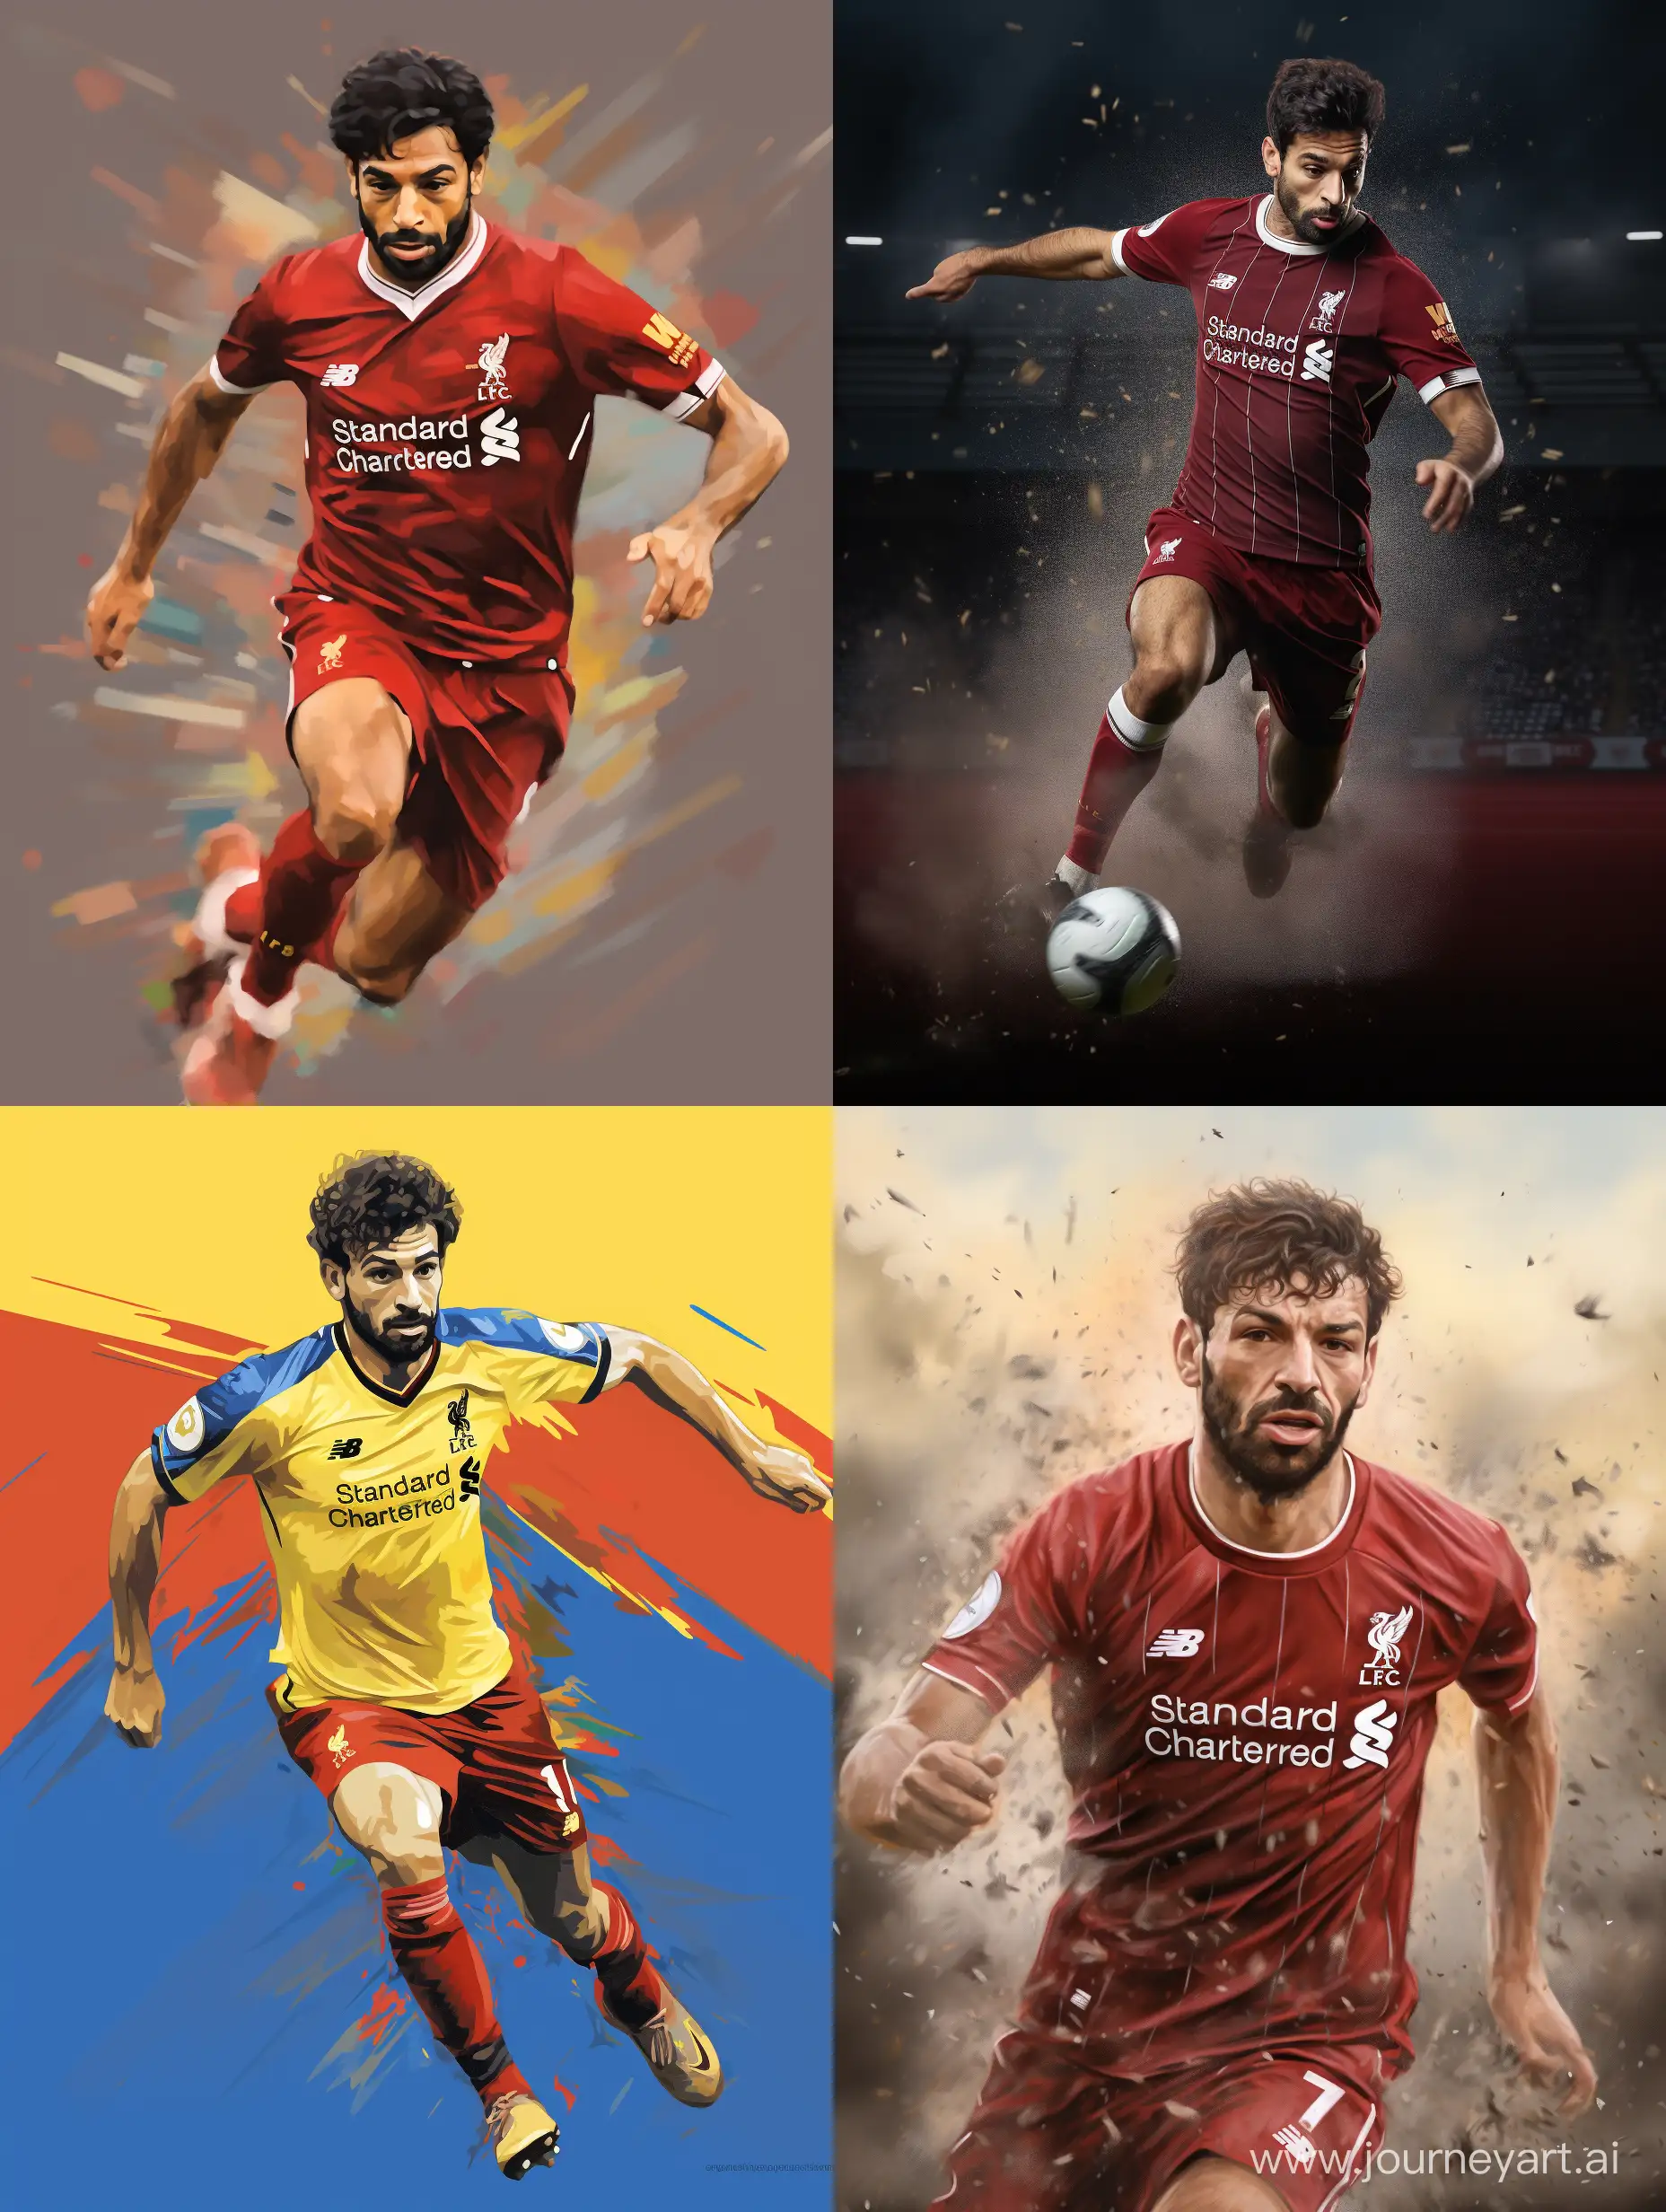 Mohamed-Salah-in-Action-Dynamic-Football-Play-with-AR-Element